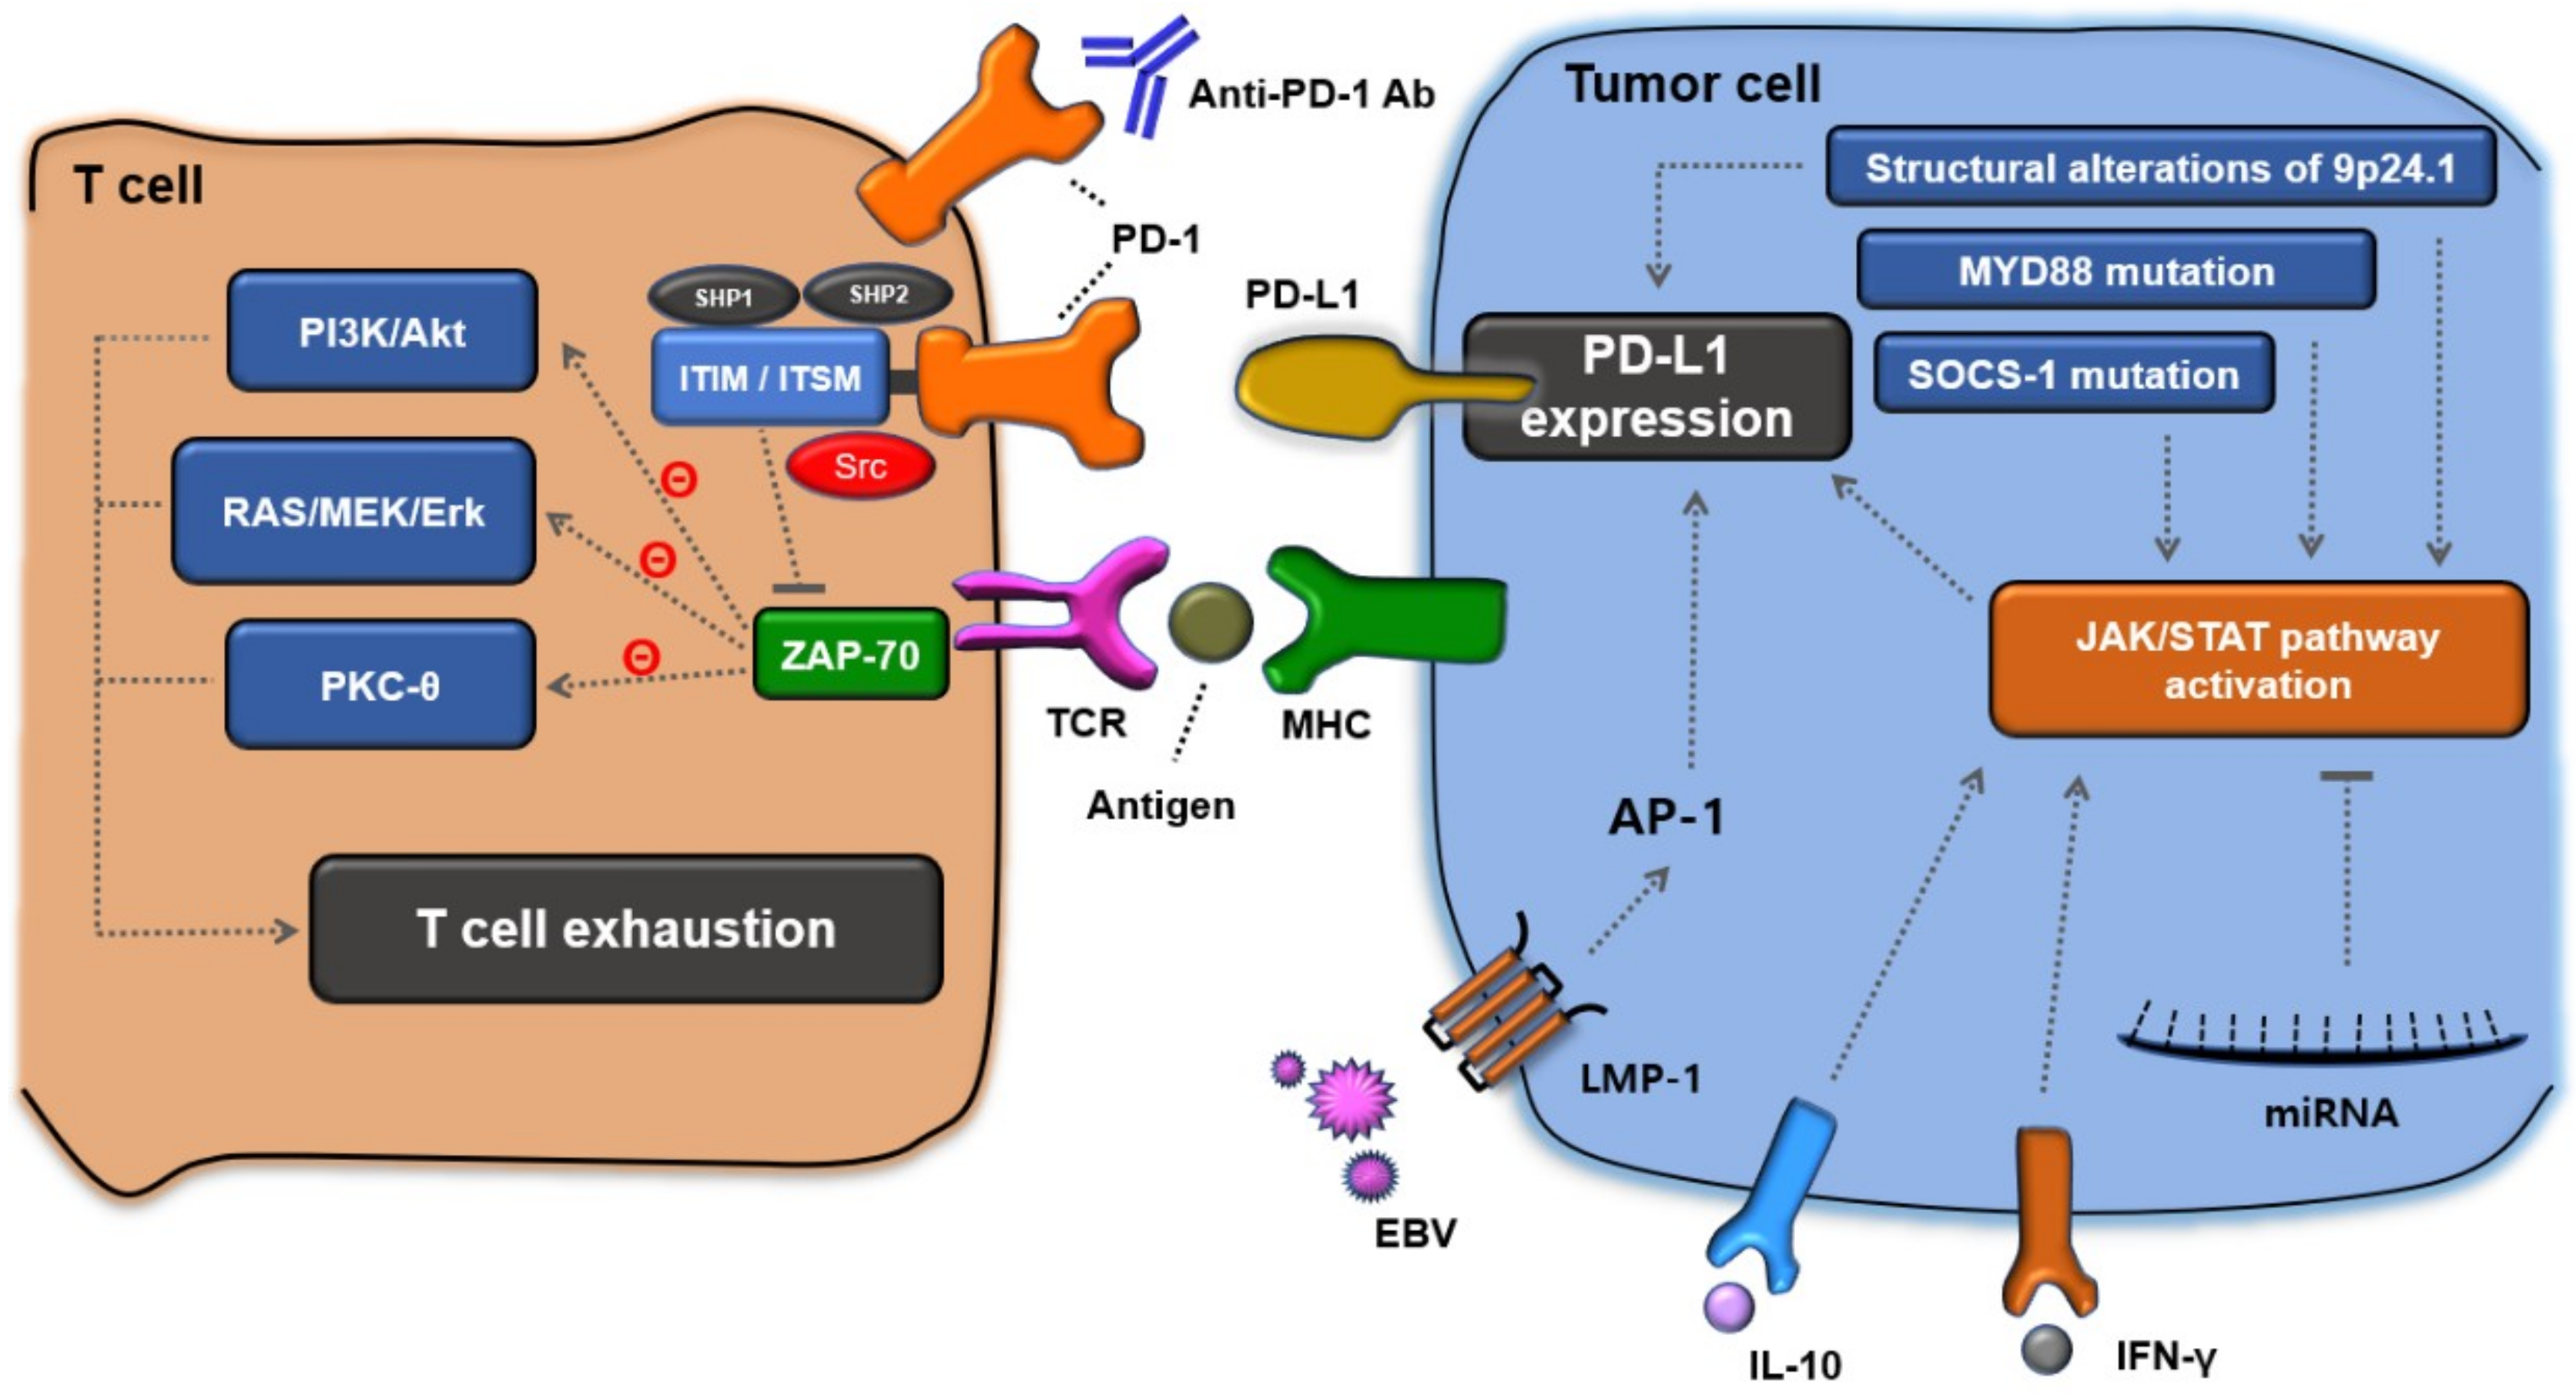 Understanding Immune Evasion and Therapeutic Targeting Associated with PD-1/PD-L1 Pathway in Diffuse Large B-cell Lymphoma